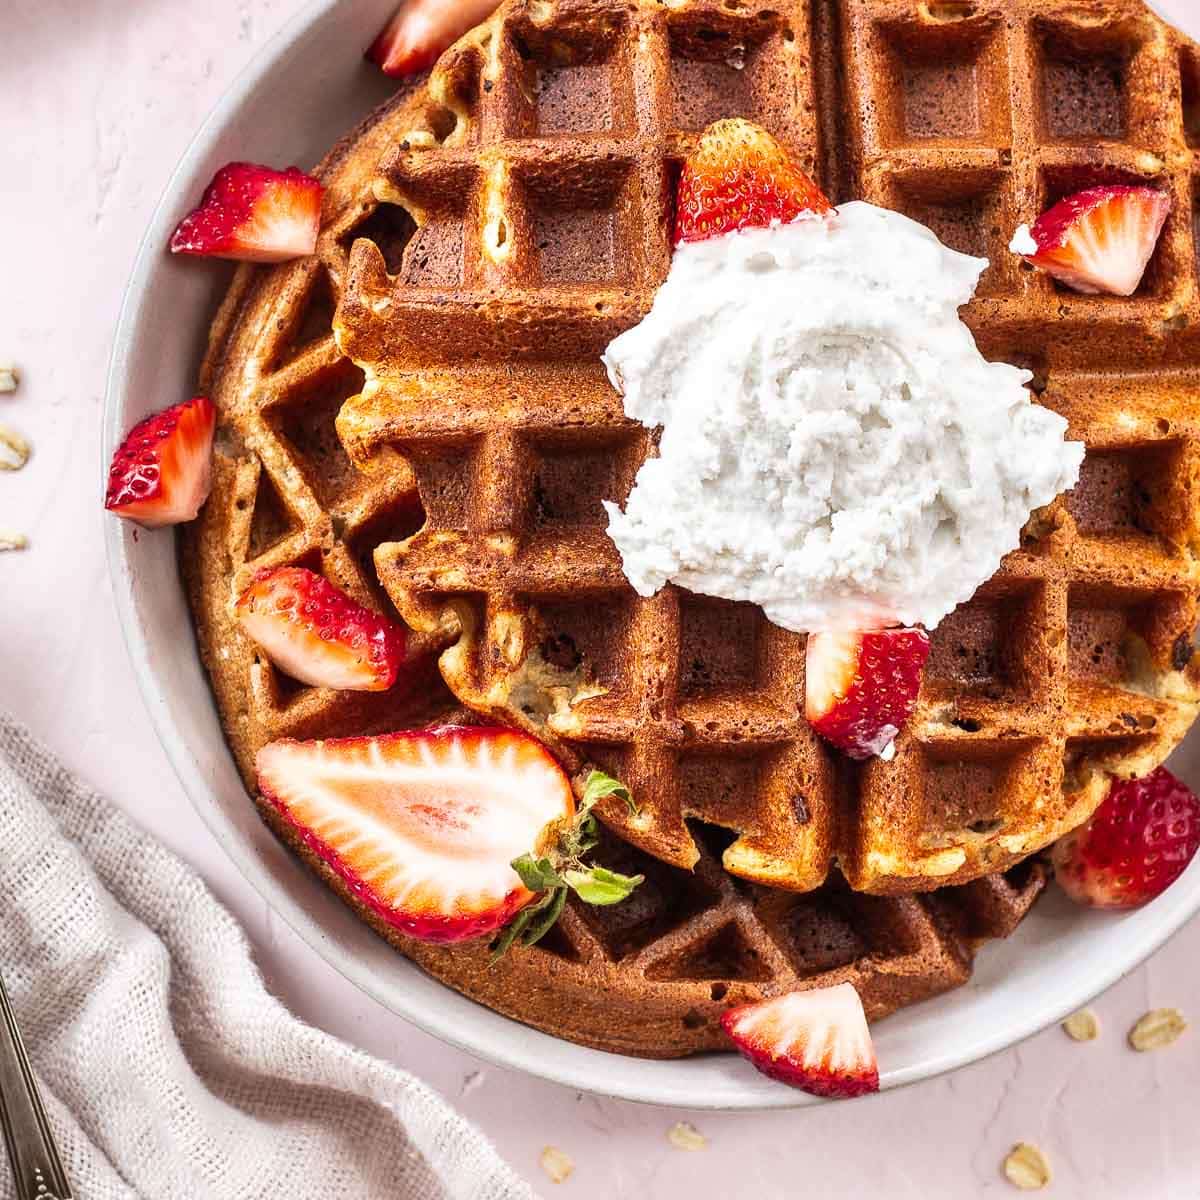 Plate of oatmeal waffles with coconut whipped cream and strawberries.